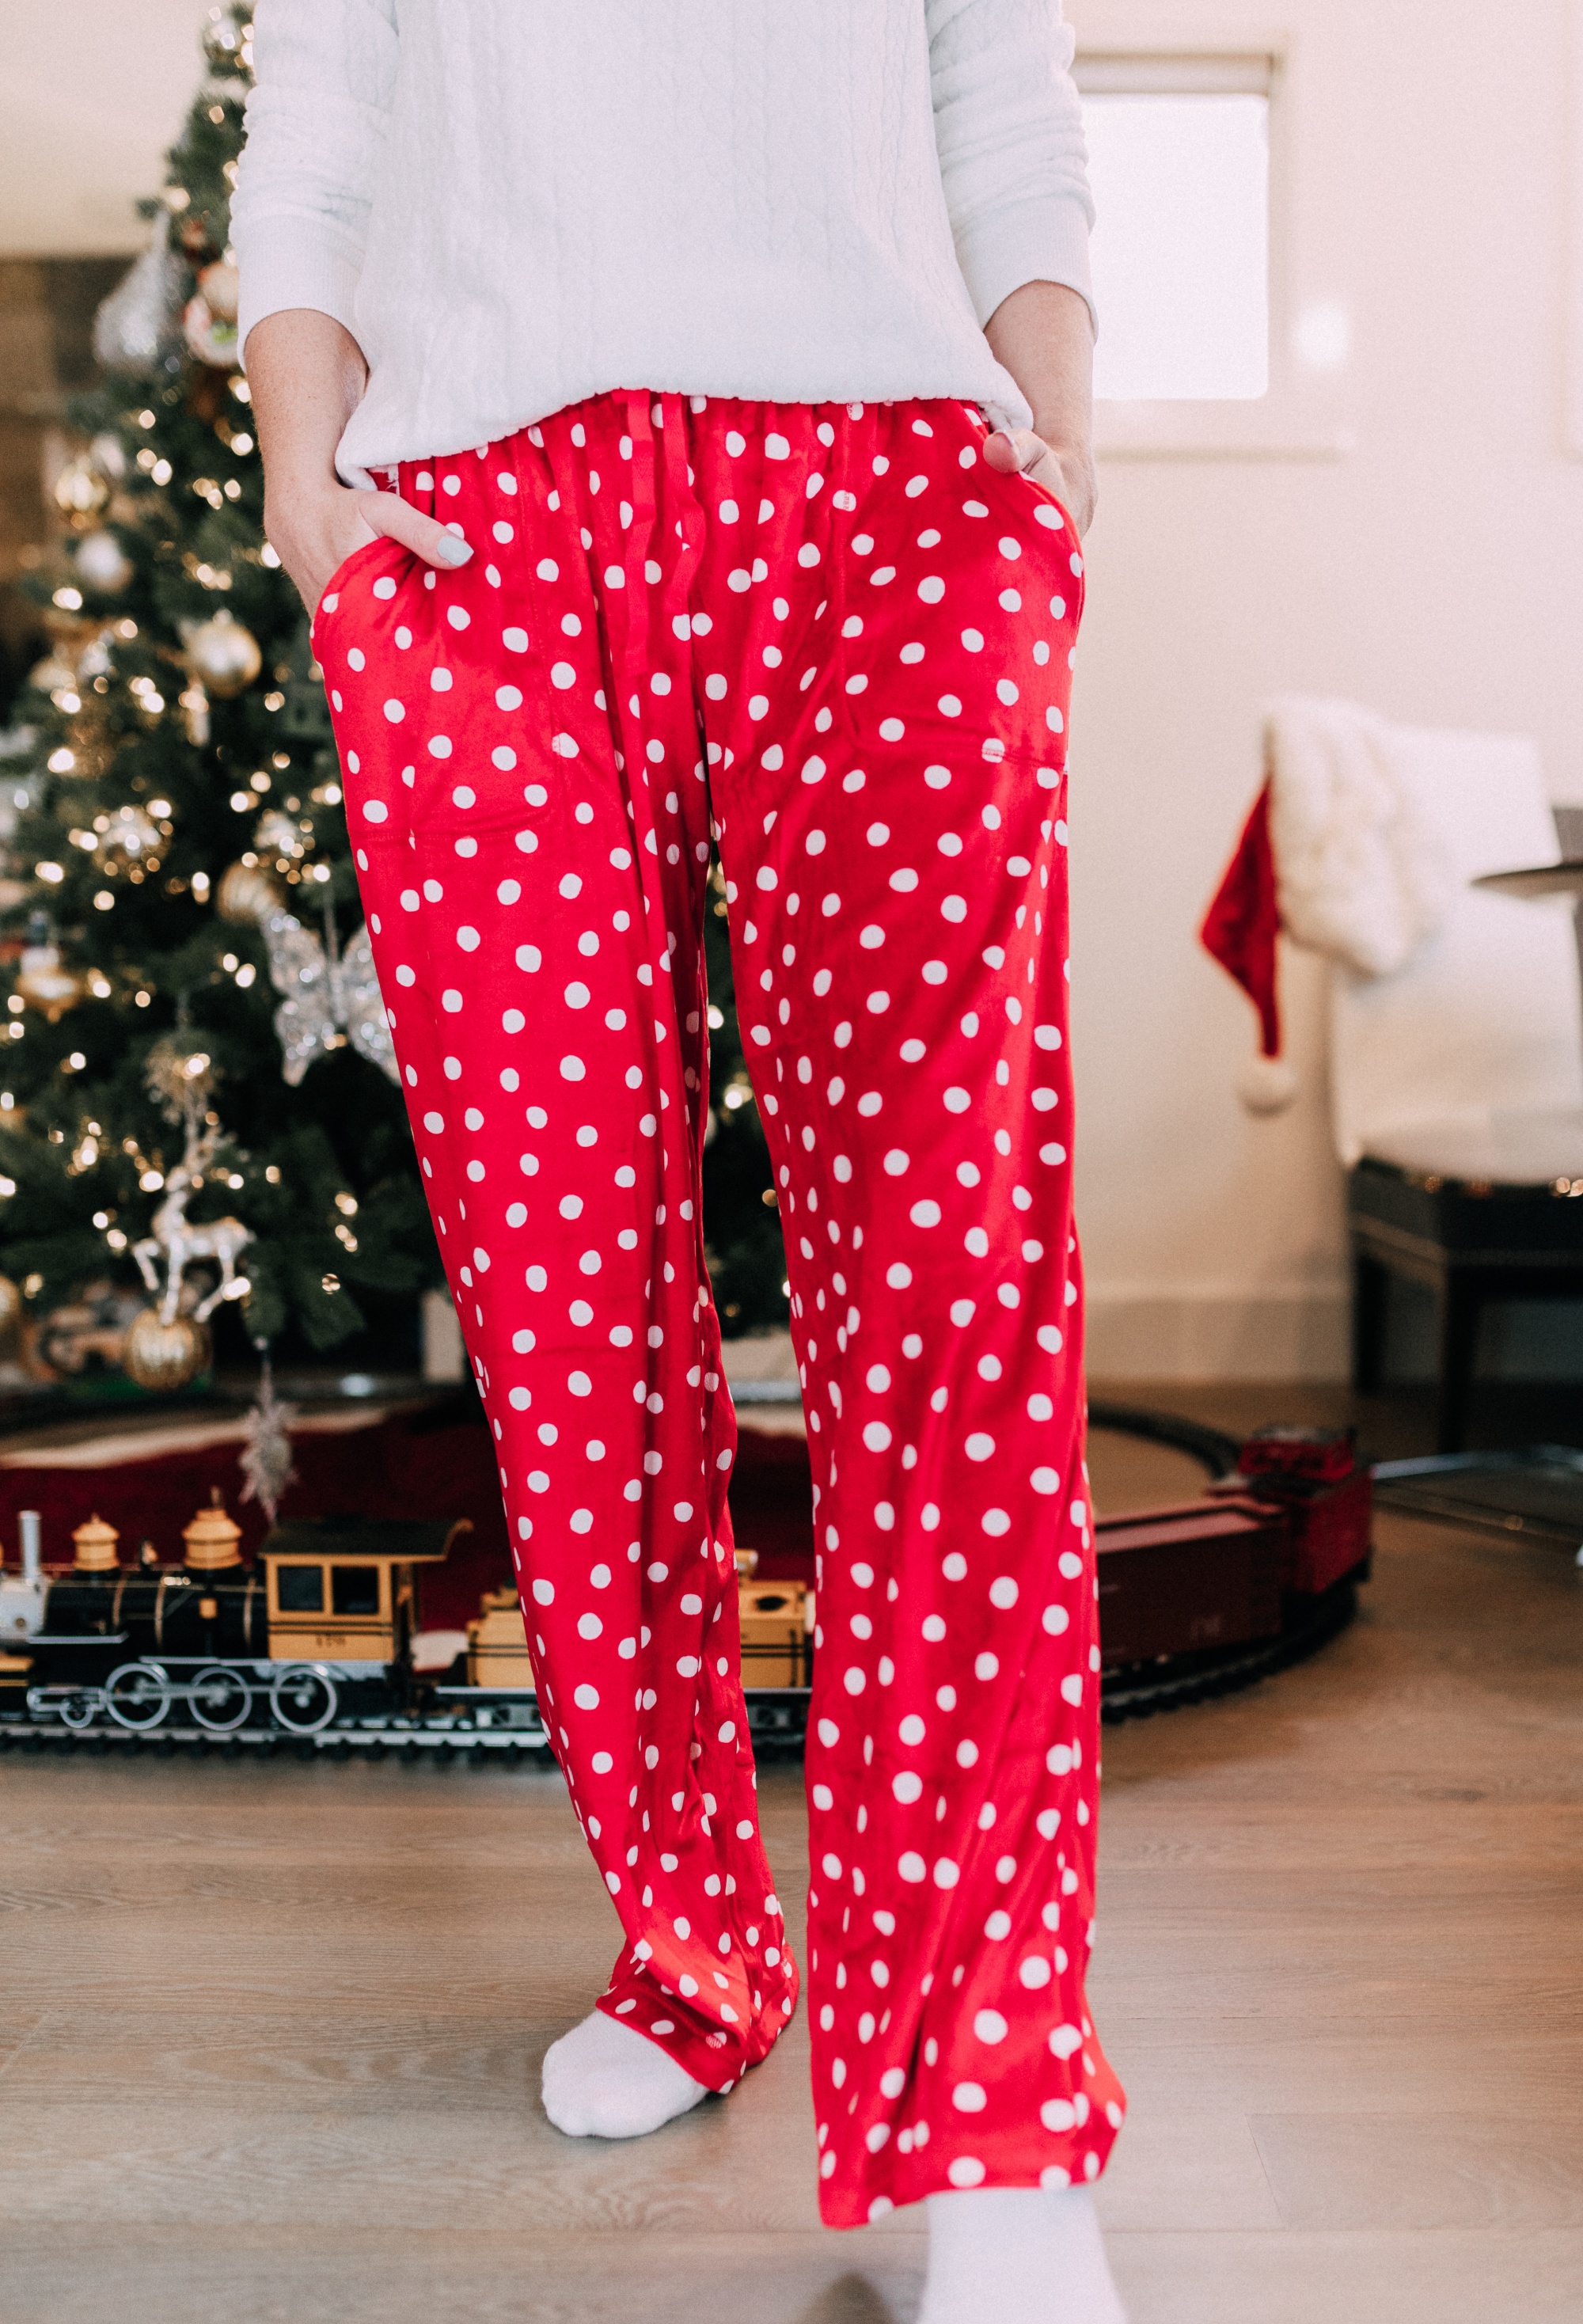 Holiday Traditions, Fashion blogger Erin Busbee of BusbeeStyle.com wearing red fleece polka dot pajama pants with a fleece cable knit pullover from Jockey in Telluride, CO